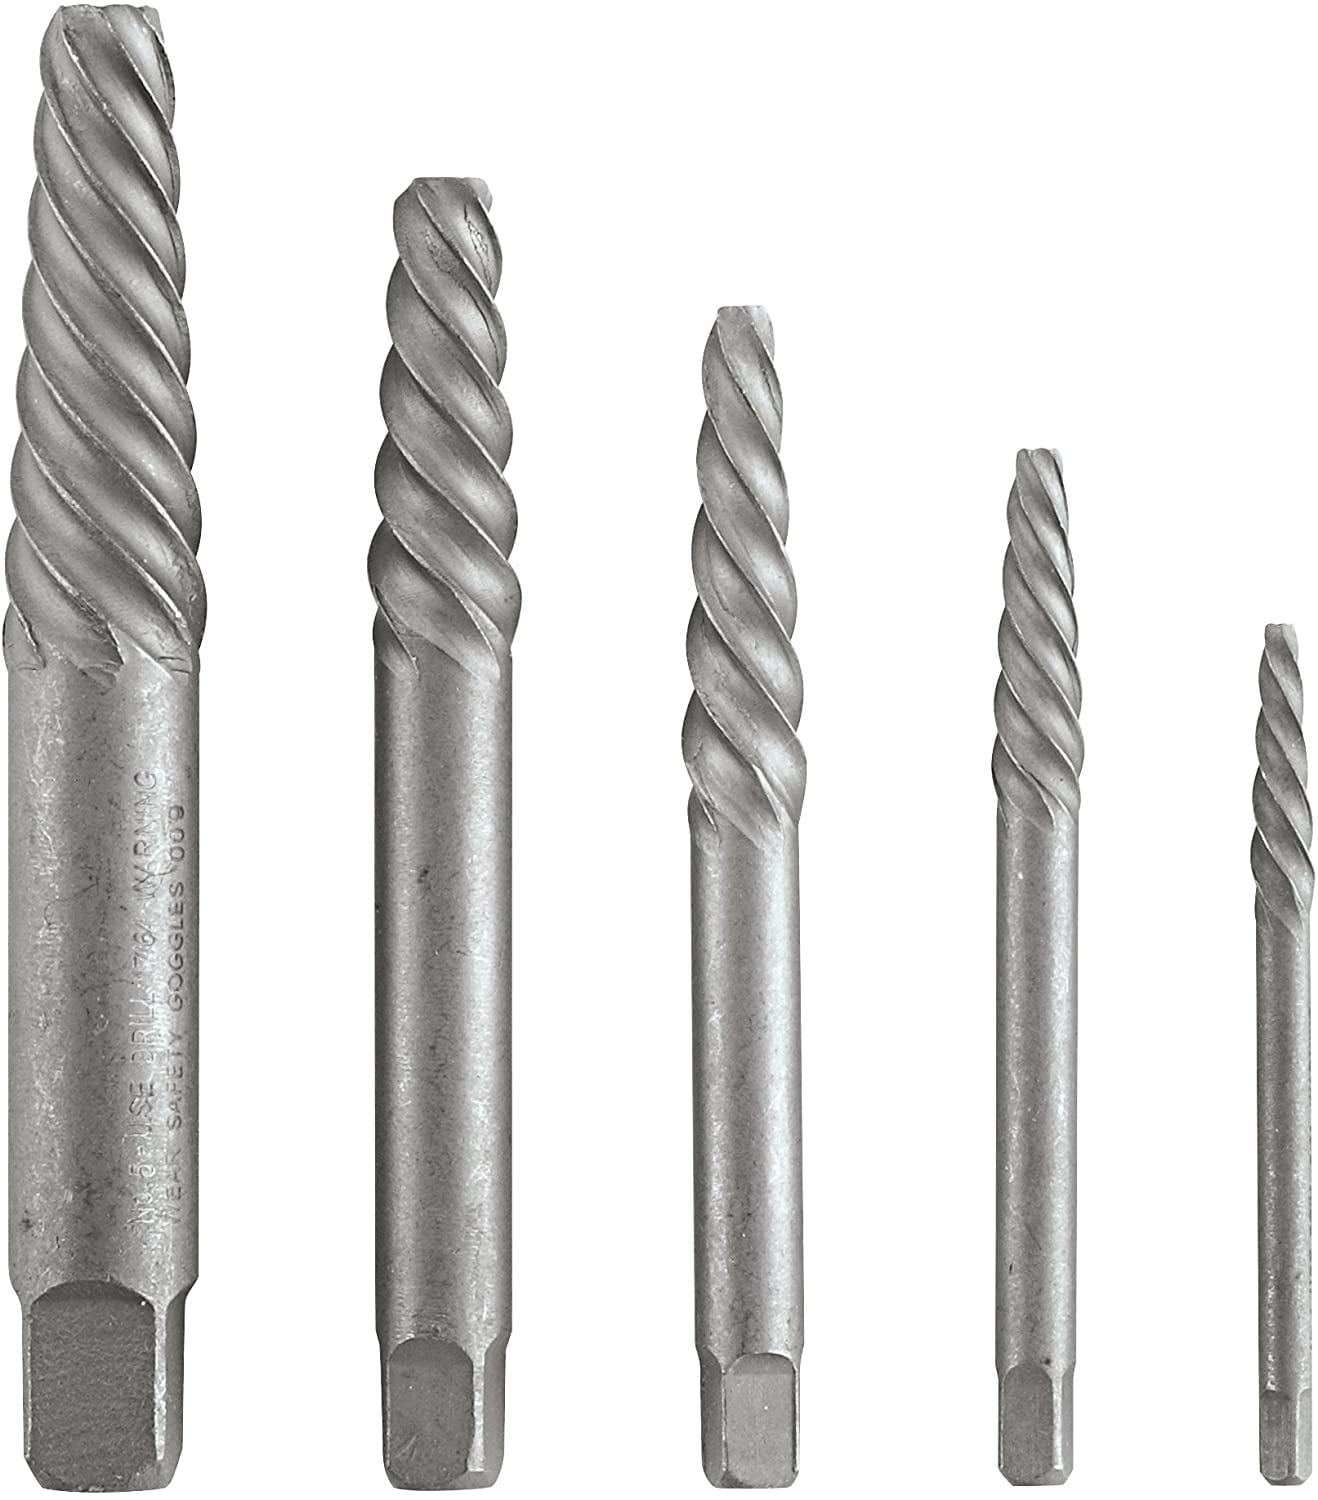 #1,3,4,5 VERMONT AMERICAN SPIRAL SCREW  BOLT EXTRACTOR EASYOUT TOOL BIT E Z OUT